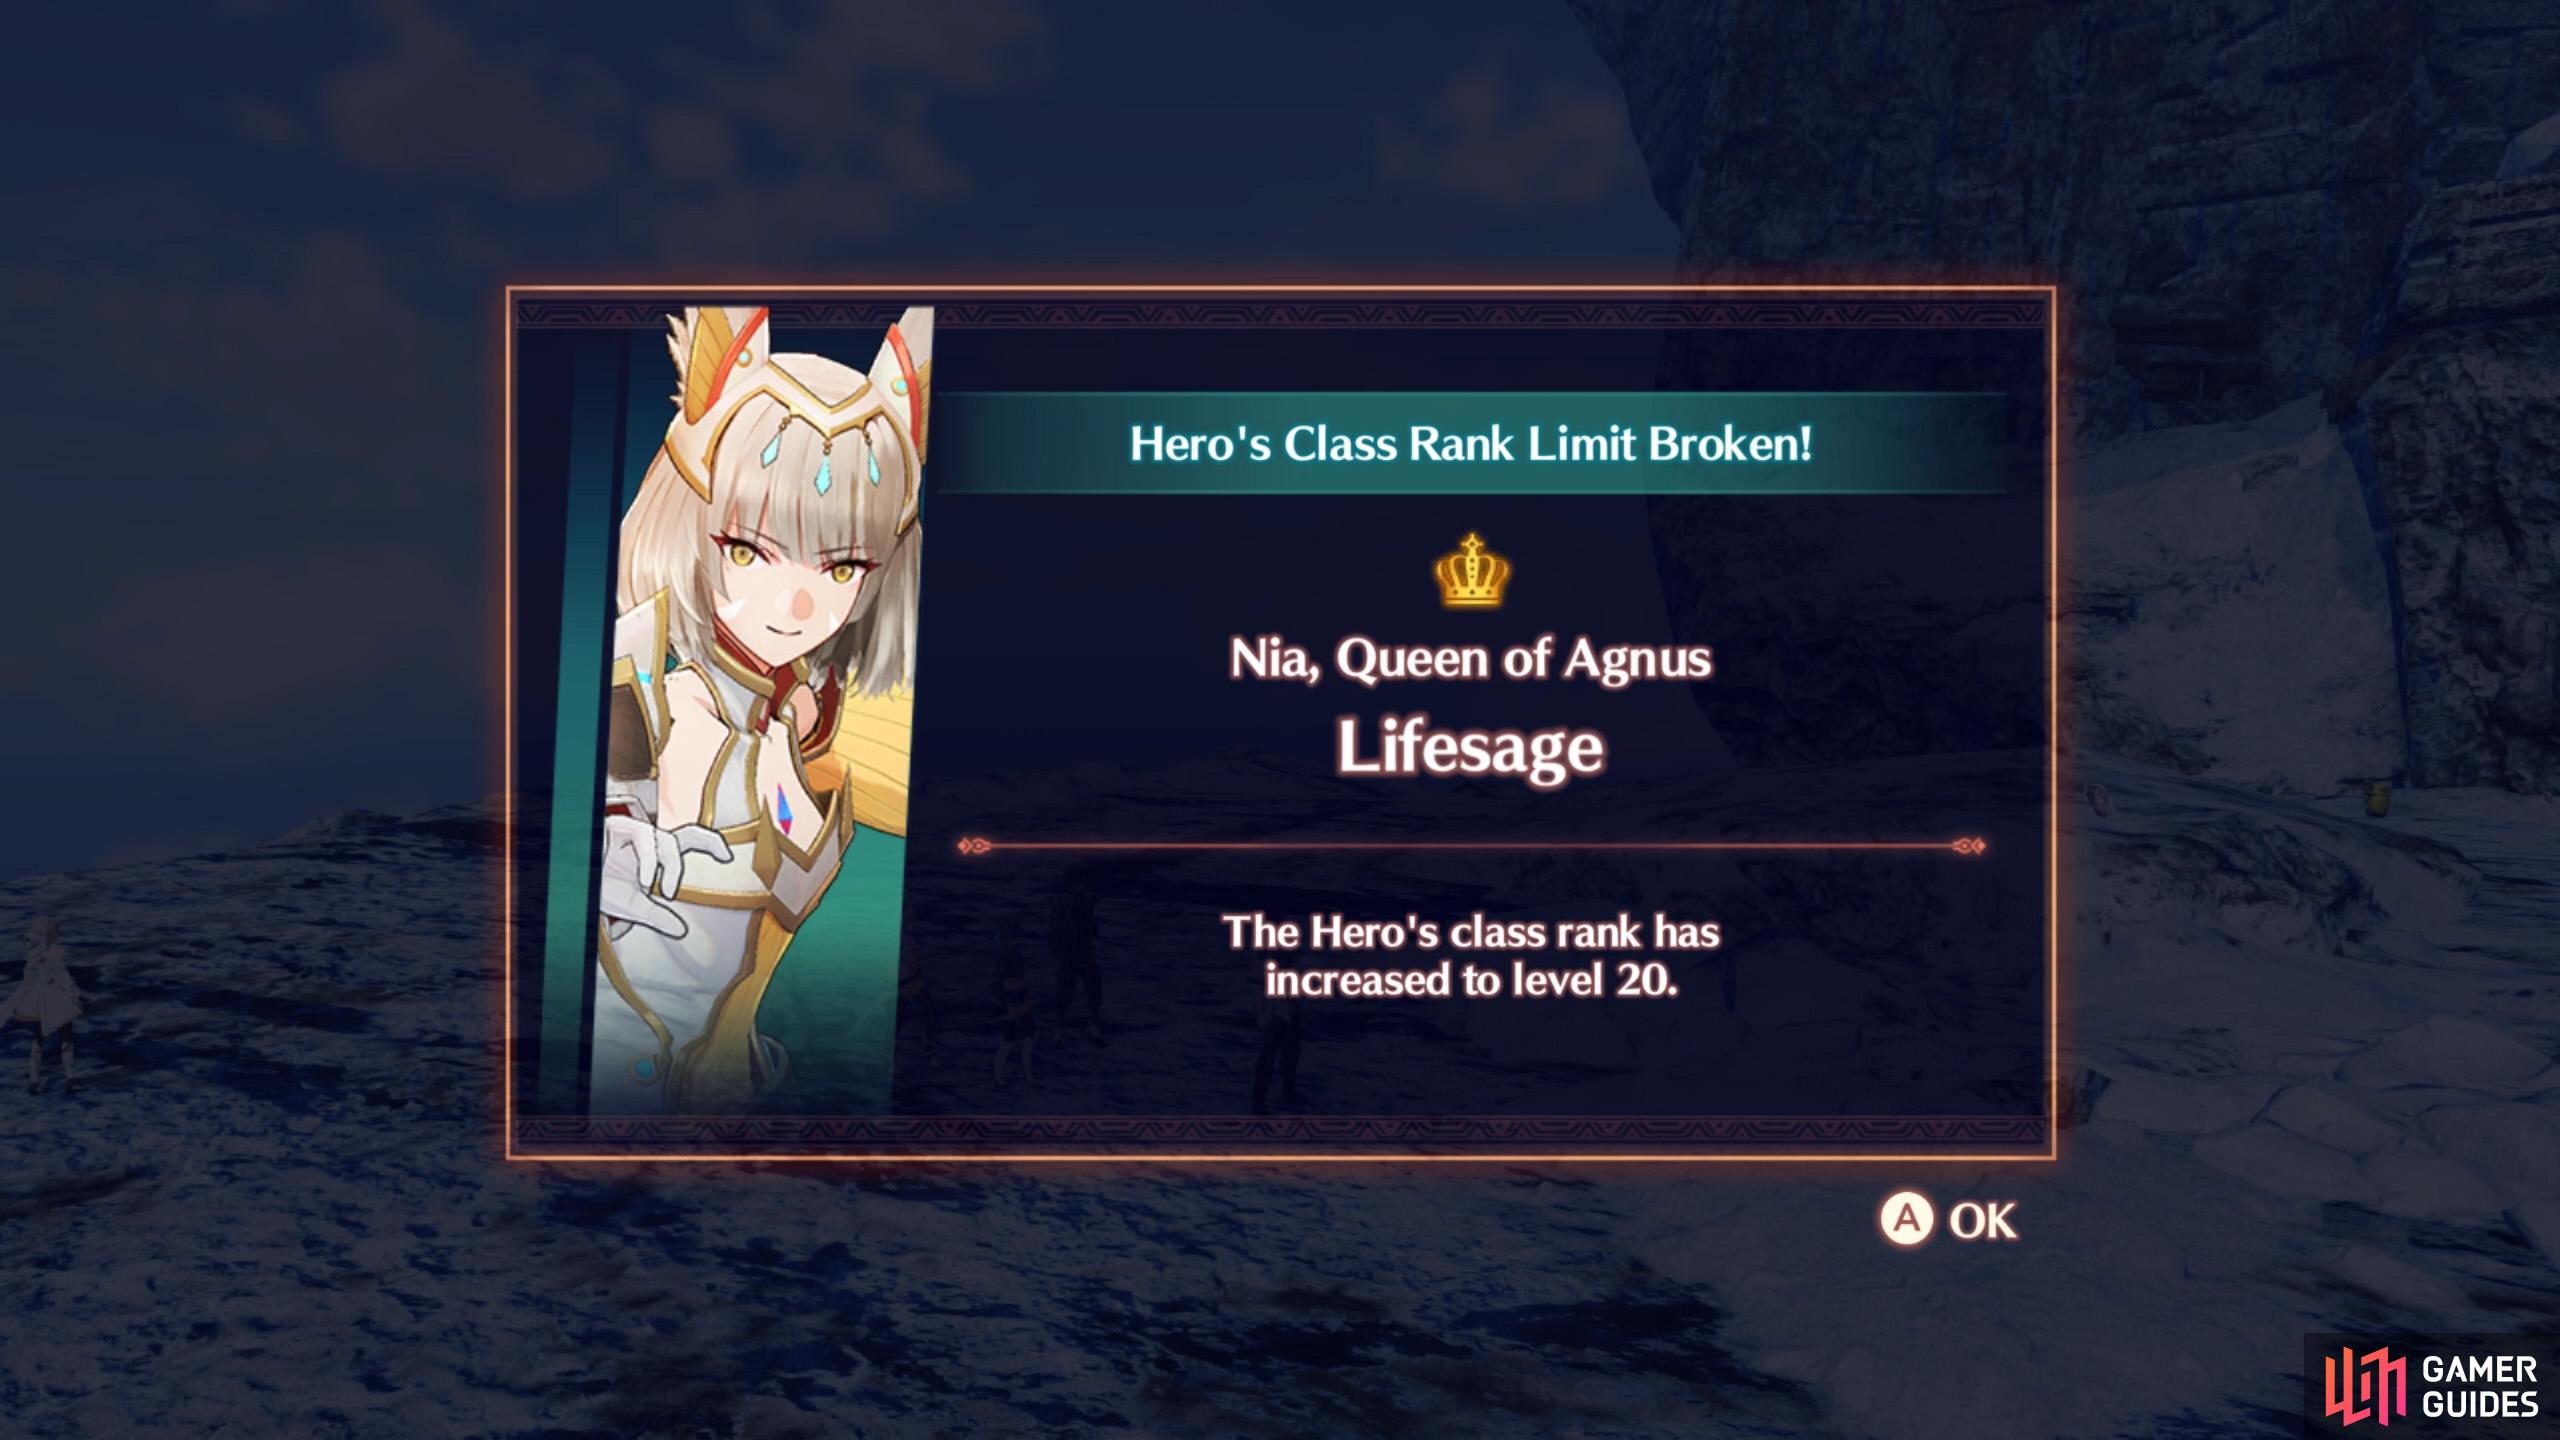 Rank 20 will be unlocked for the Lifesage class.